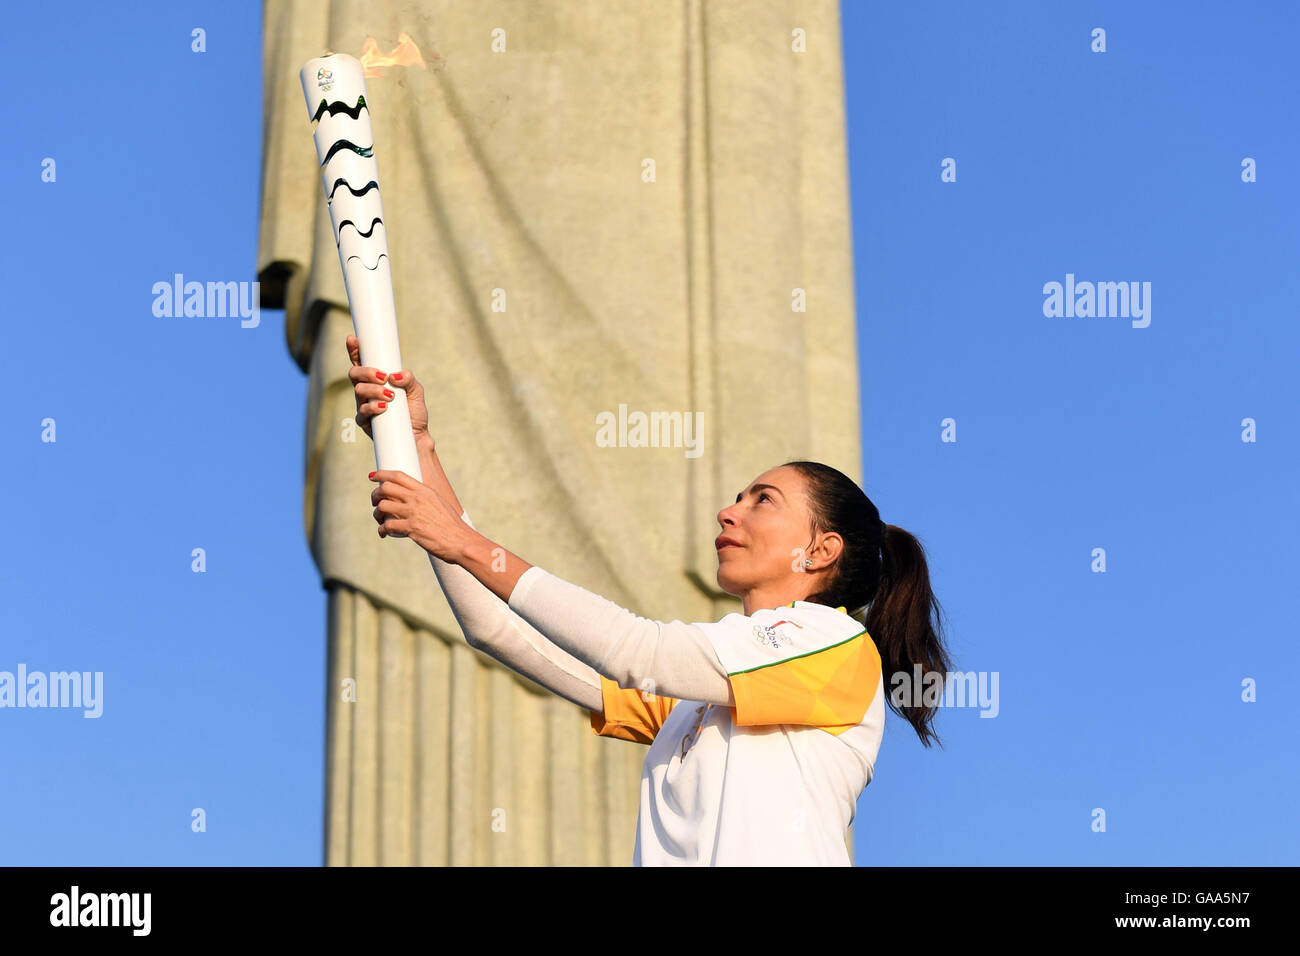 Rio de Janeiro, Brazil. 5th Aug, 2016. Brazilian former volleyball player Maria Isabel Barroso holds the Olympic torch during the Olympic Torch Relay in front of Christ the Redeemer statue early in the morning prior to the Rio 2016 Olympic Games in Rio de Janeiro, Brazil, 5 August 2016. Rio 2016 Olympic Games take place from 05 to 21 August. Photo: Sebastian Kahnert/dpa/Alamy Live News Stock Photo